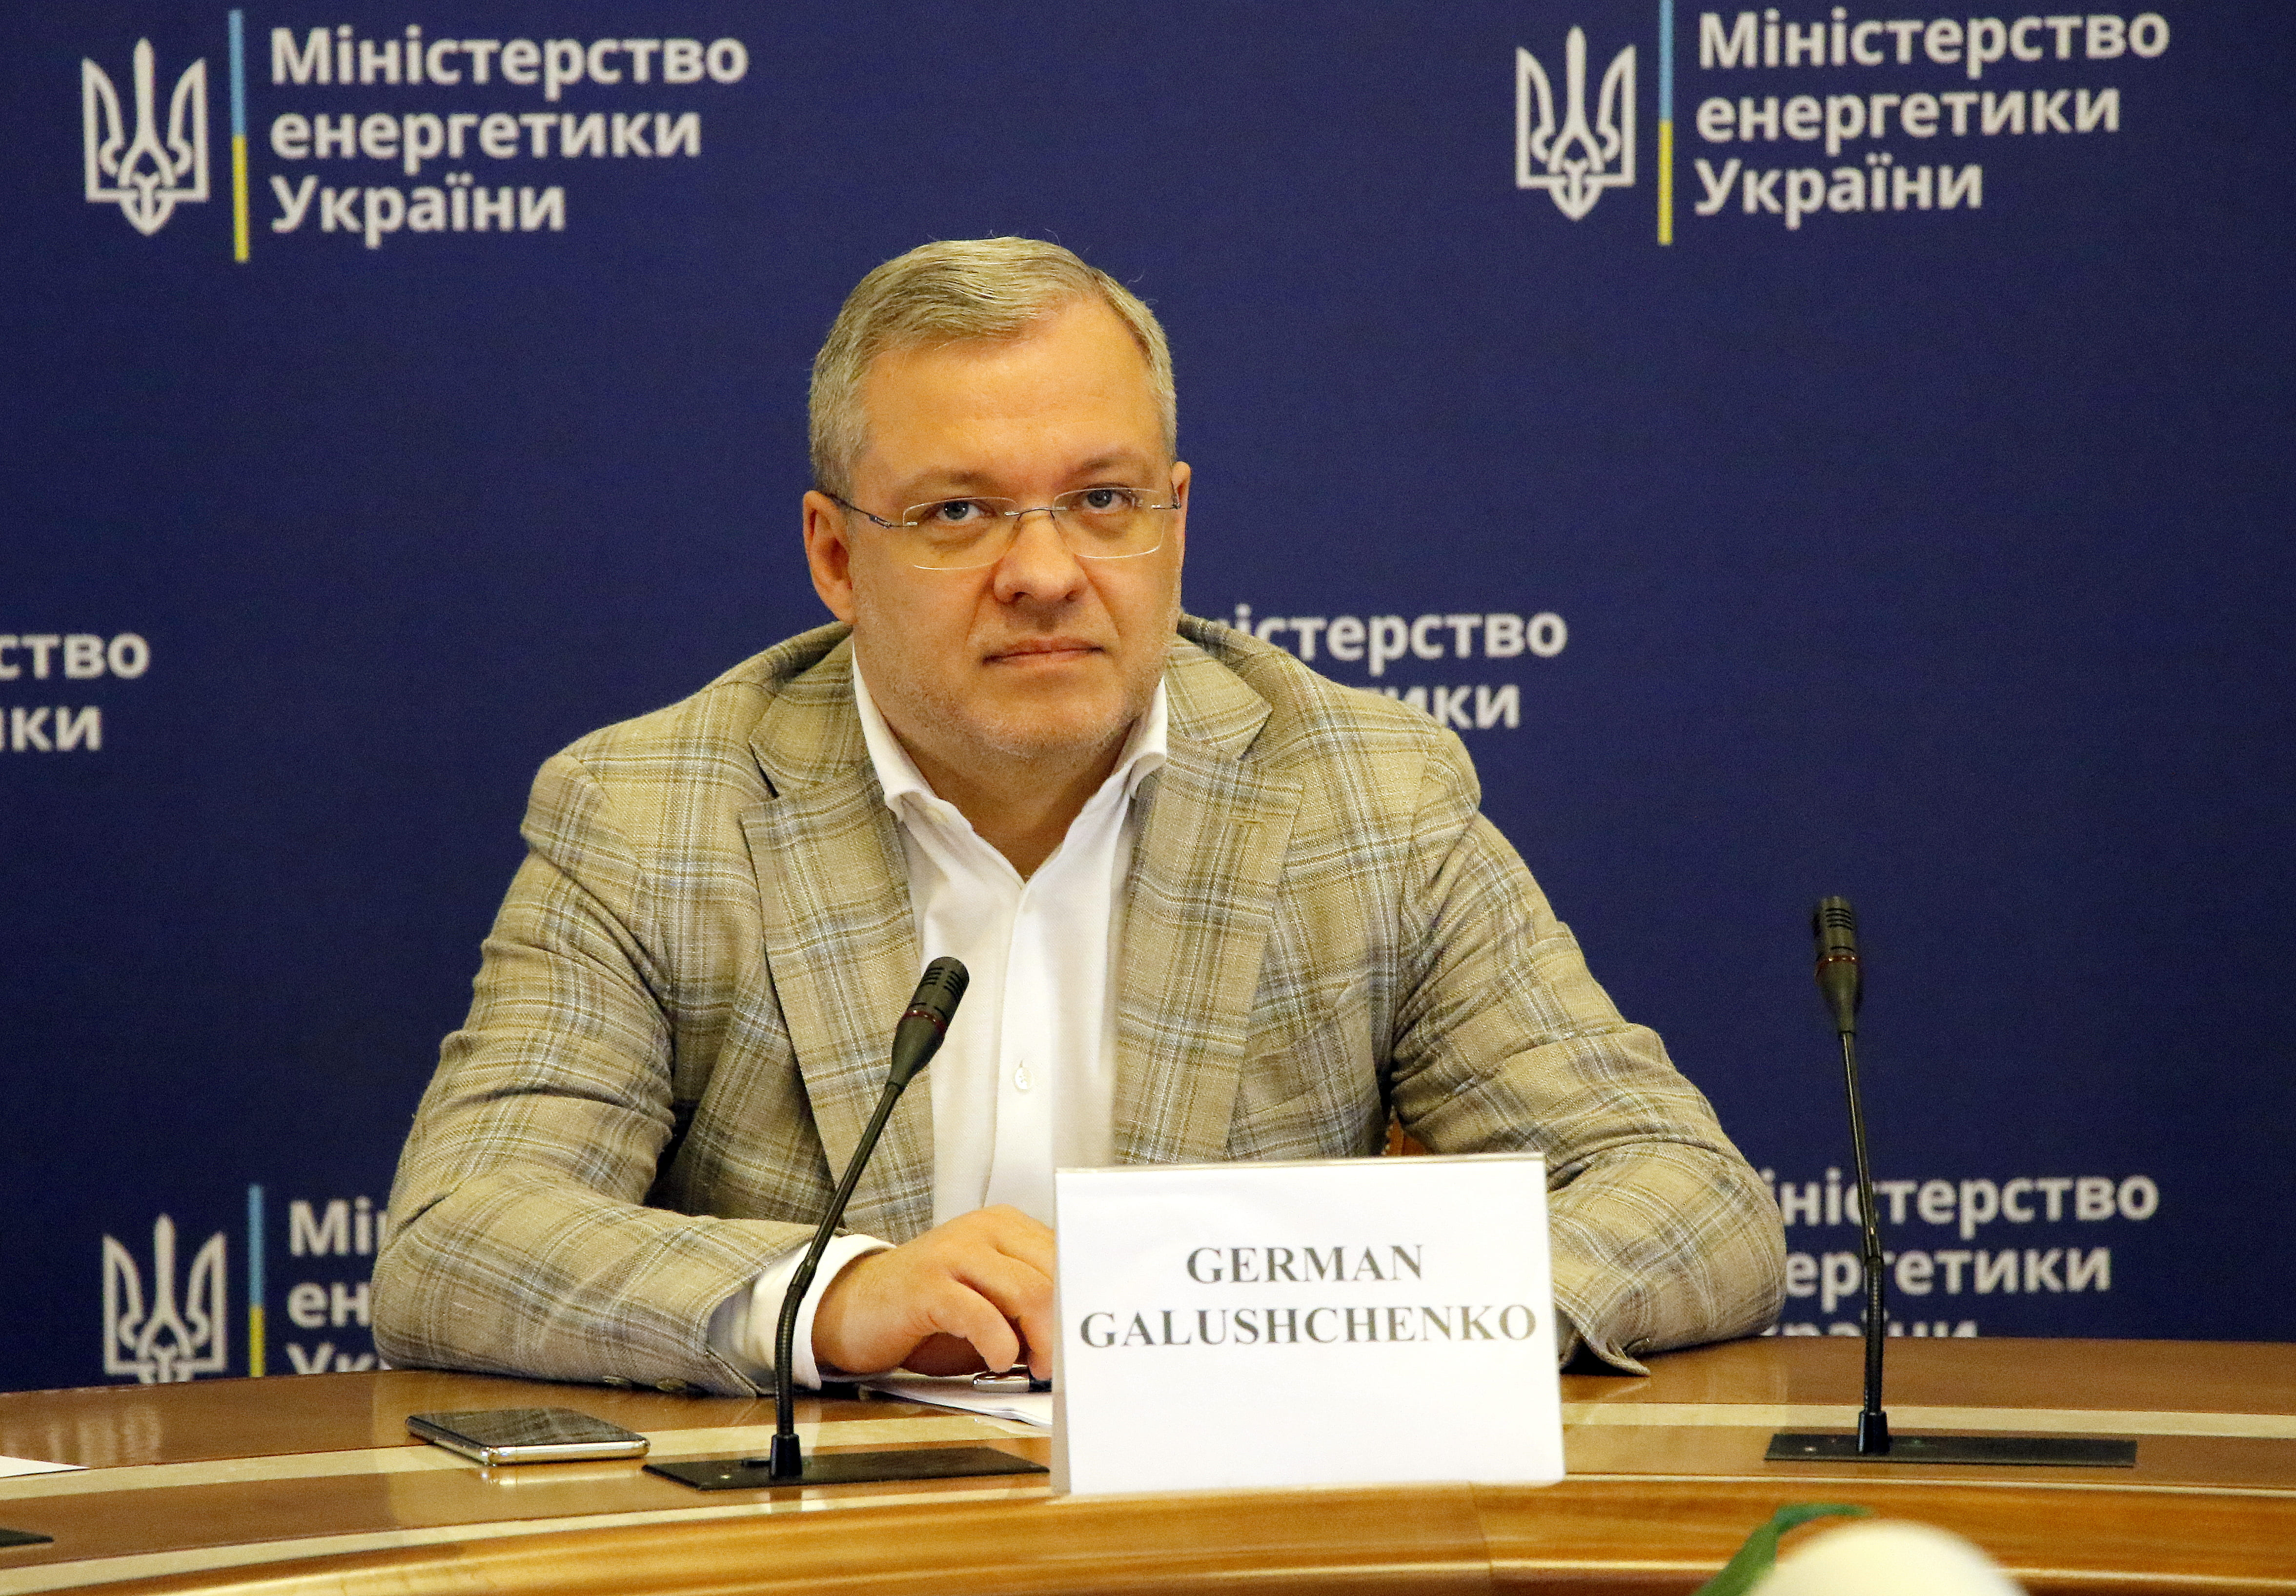 German Galushchenko, Minister of Energy of Ukraine. Photo by press office